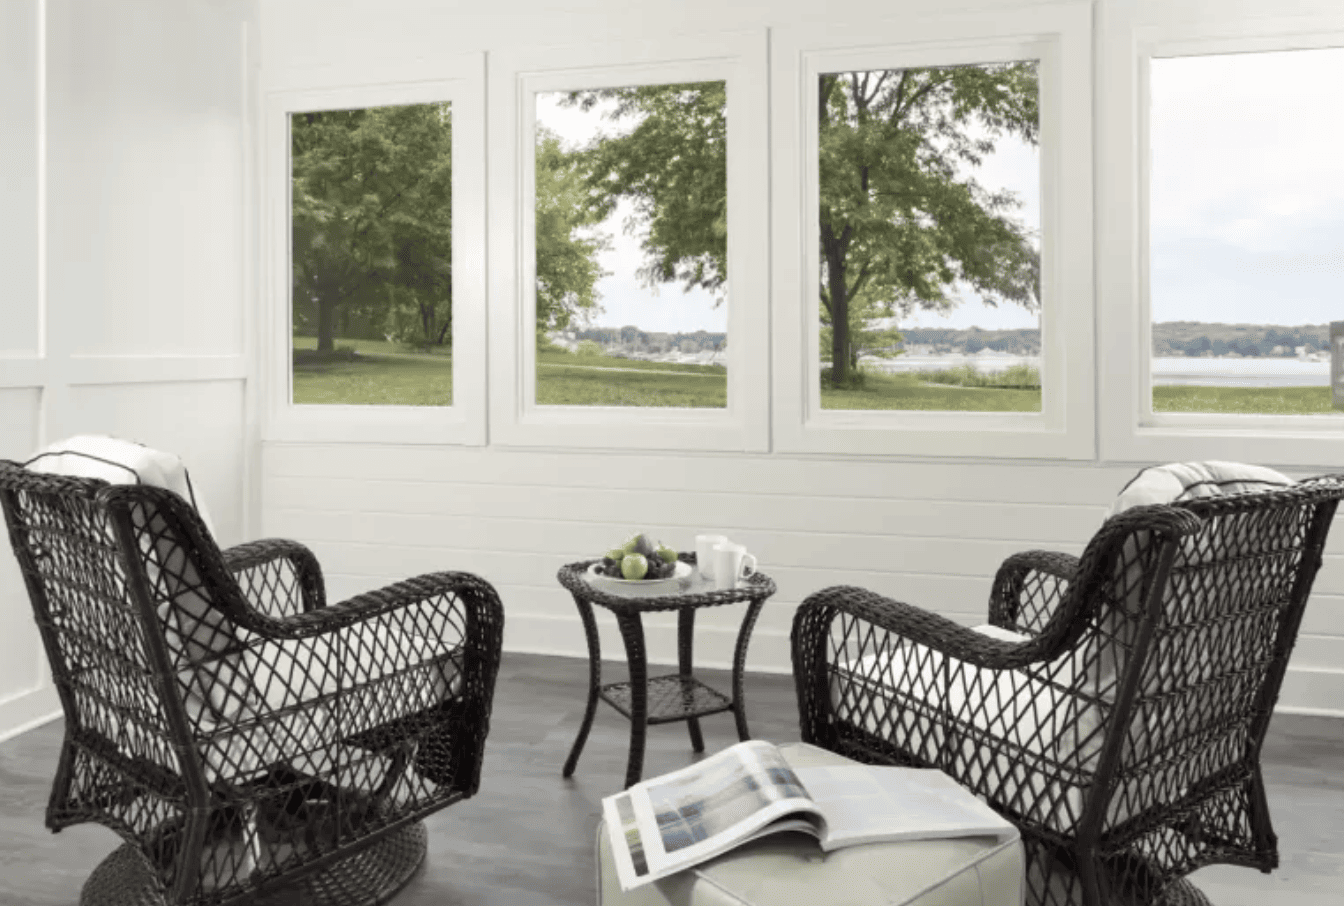 Two wicker chairs looking out of windows with a lake view